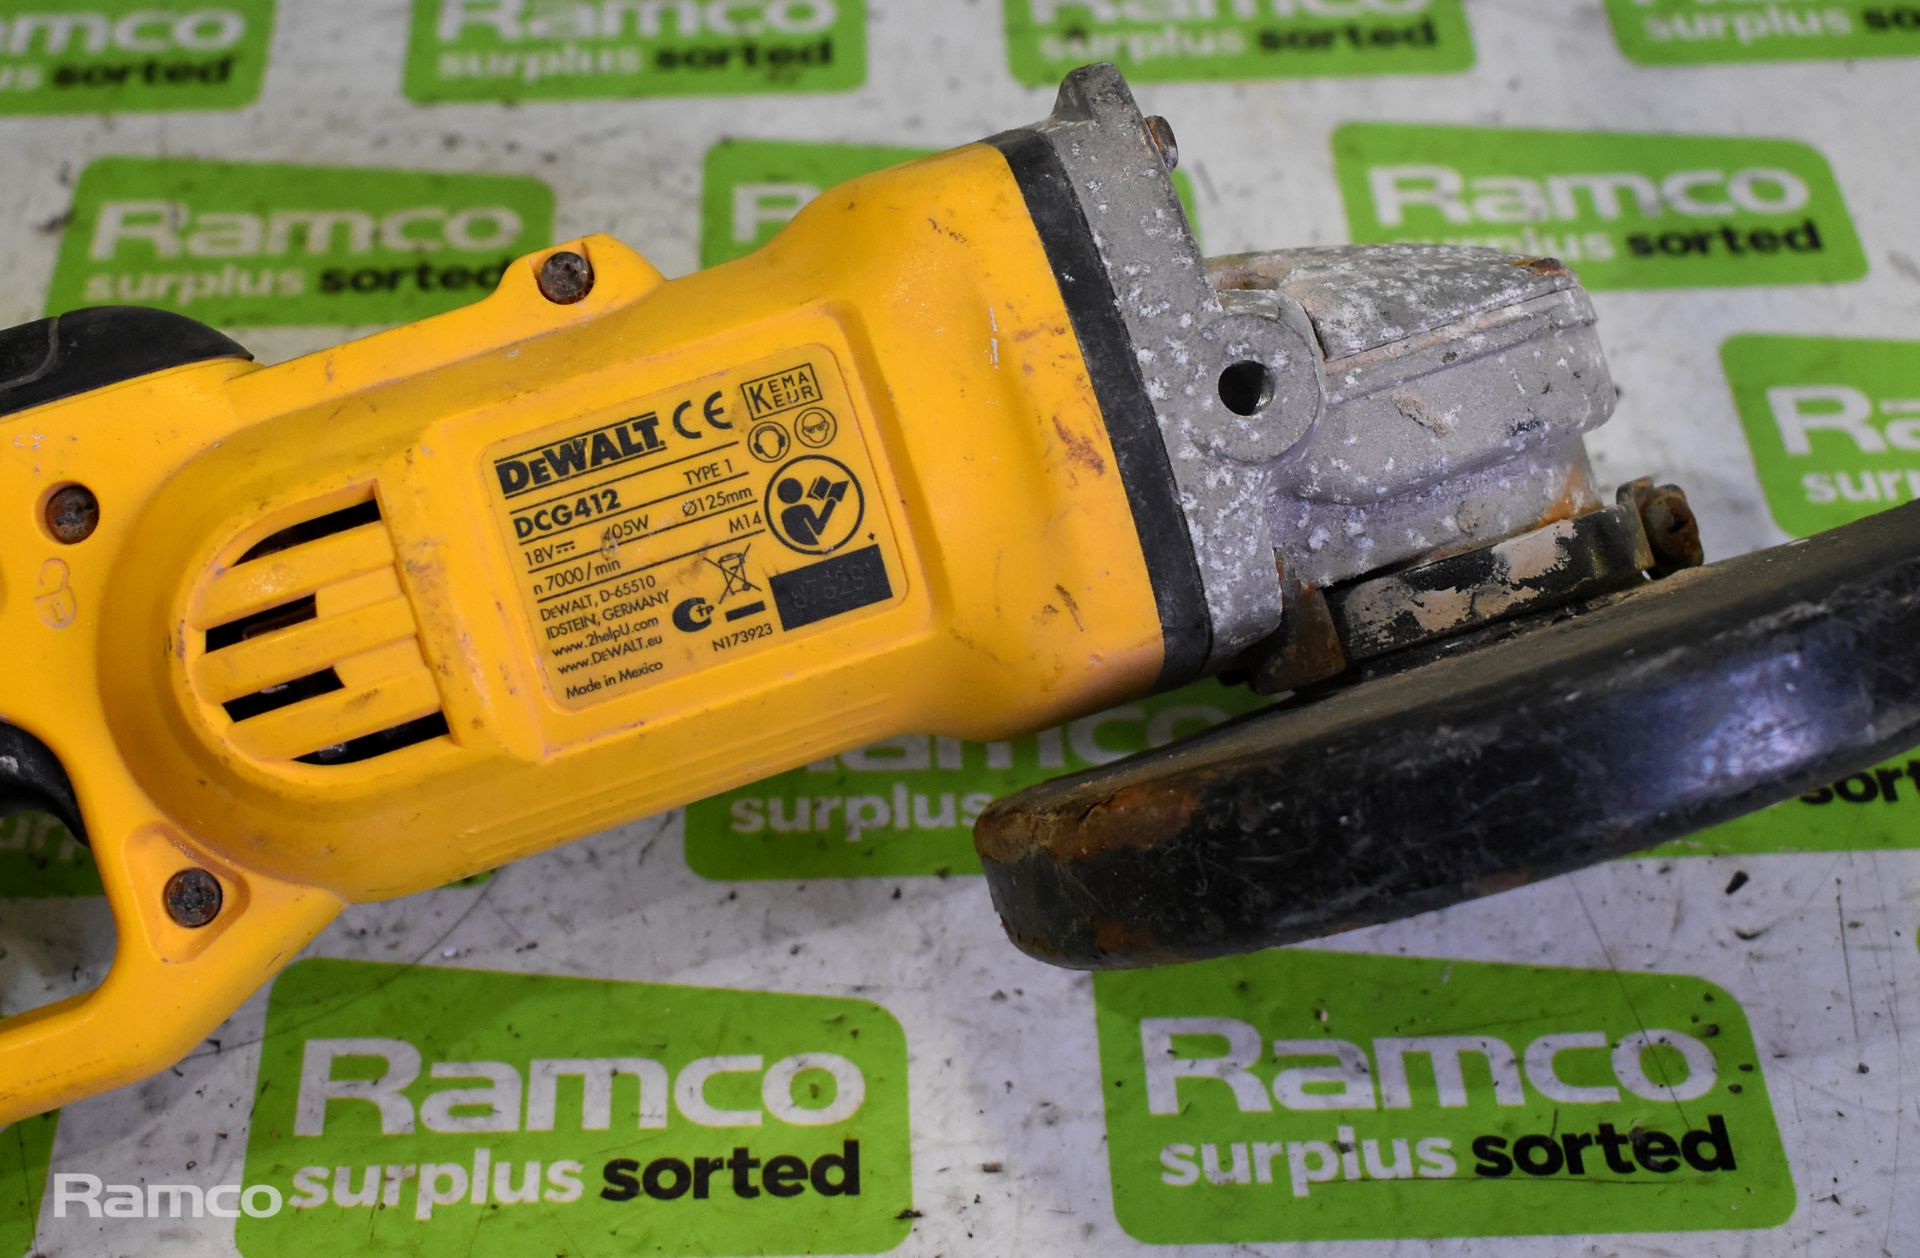 Electrical tools - Dewalt router with case, large circular saw, cordless 18V circular saw - Image 11 of 22